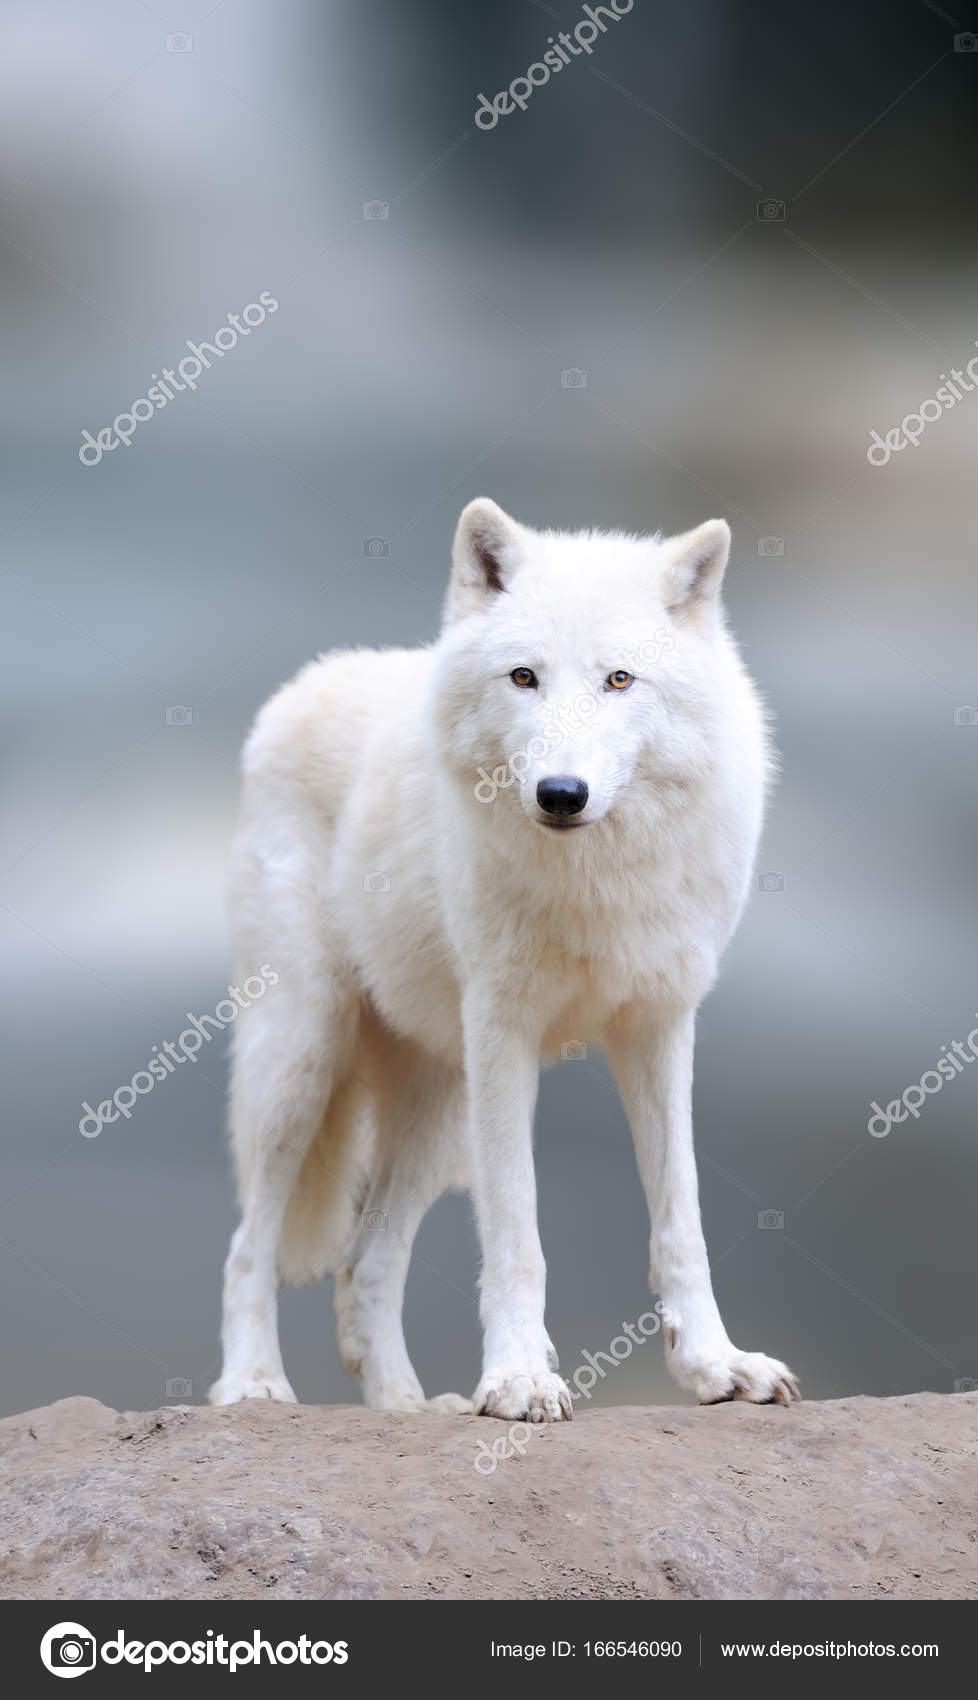 Learn About Arctic Wolves